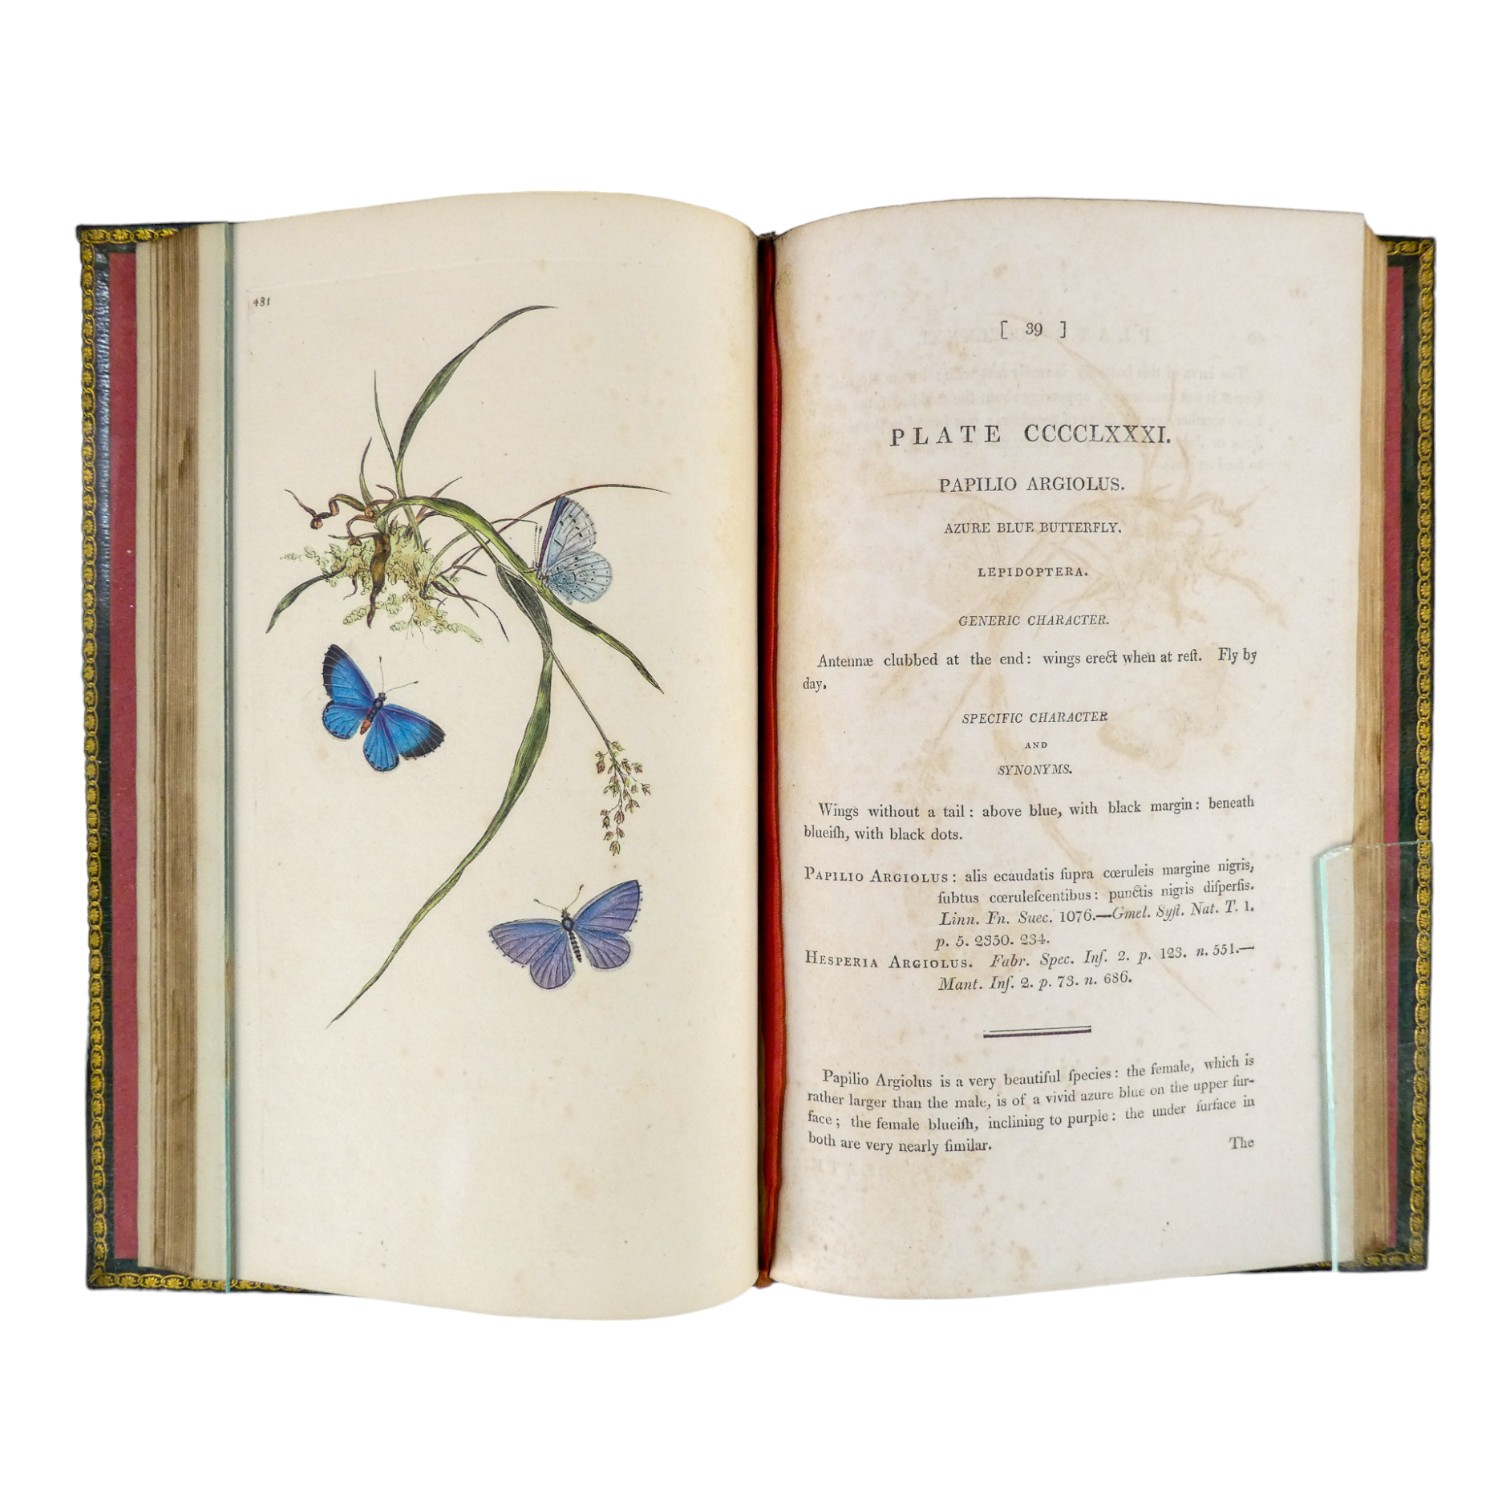 DONOVAN Edward, The Natural History of British Insects ... - published F & C Rivington 62 St Paul' - Image 31 of 33